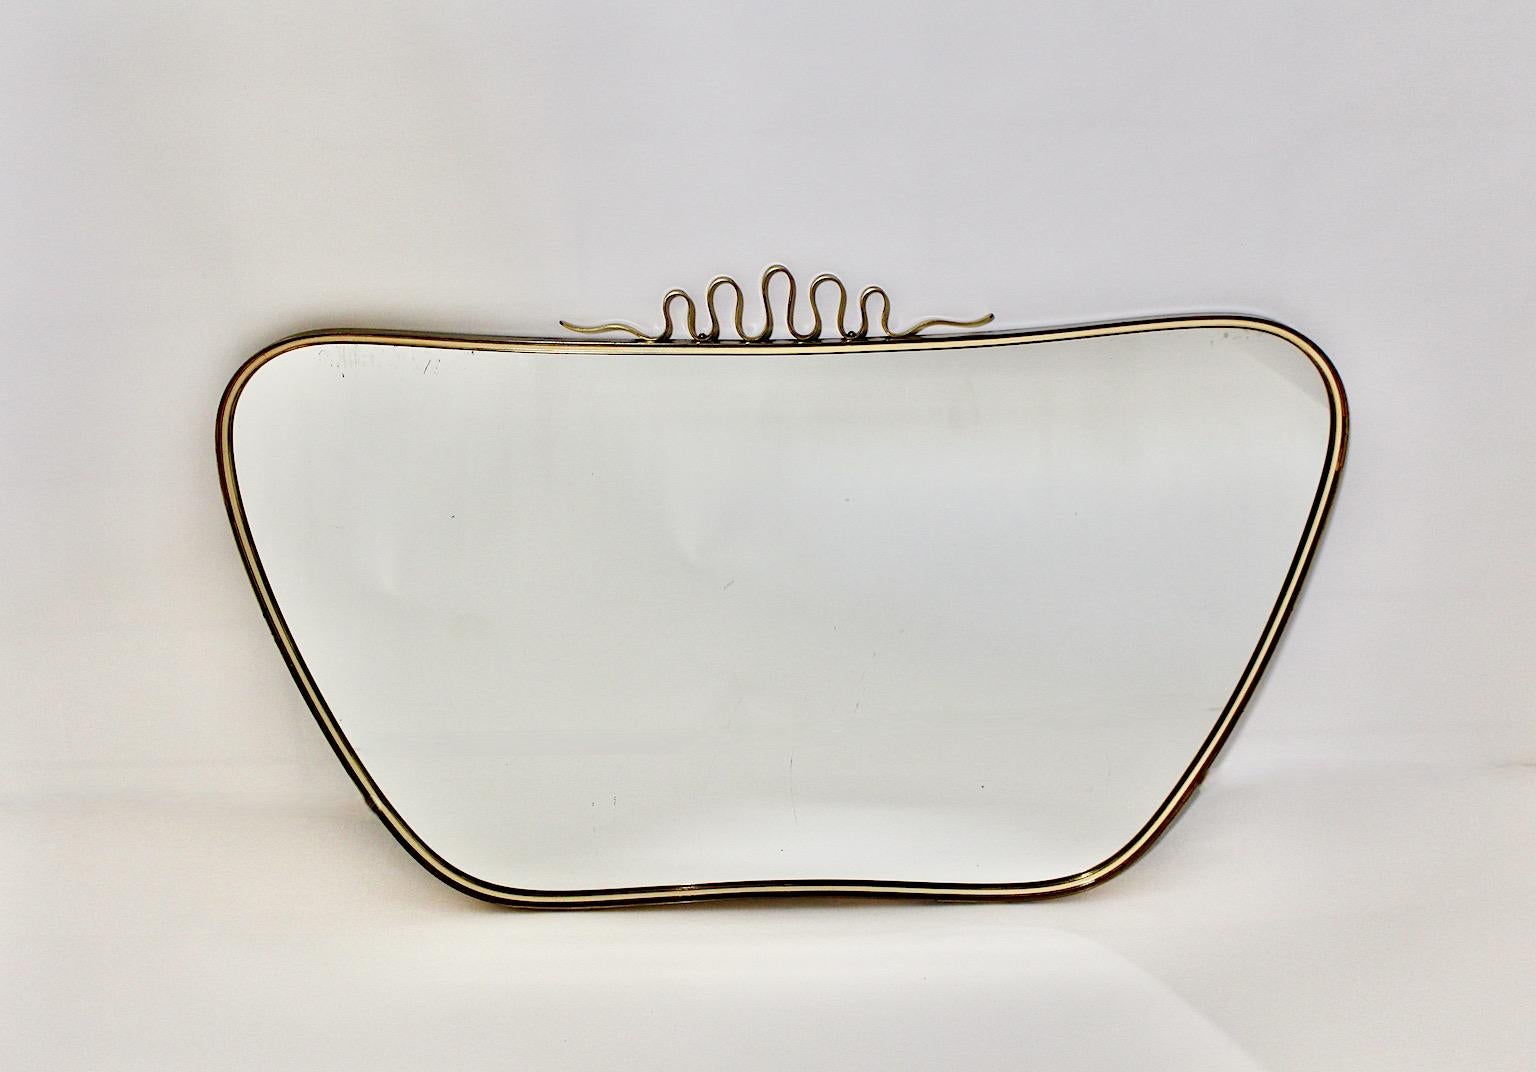 Mid-Century Modern vintage wall mirror in longish oval form with fabulous brass loops as decor at the top.
While the brass decor at the top shows amazing brass patina the mirror frame features a white framed line, which highlights the elegant and